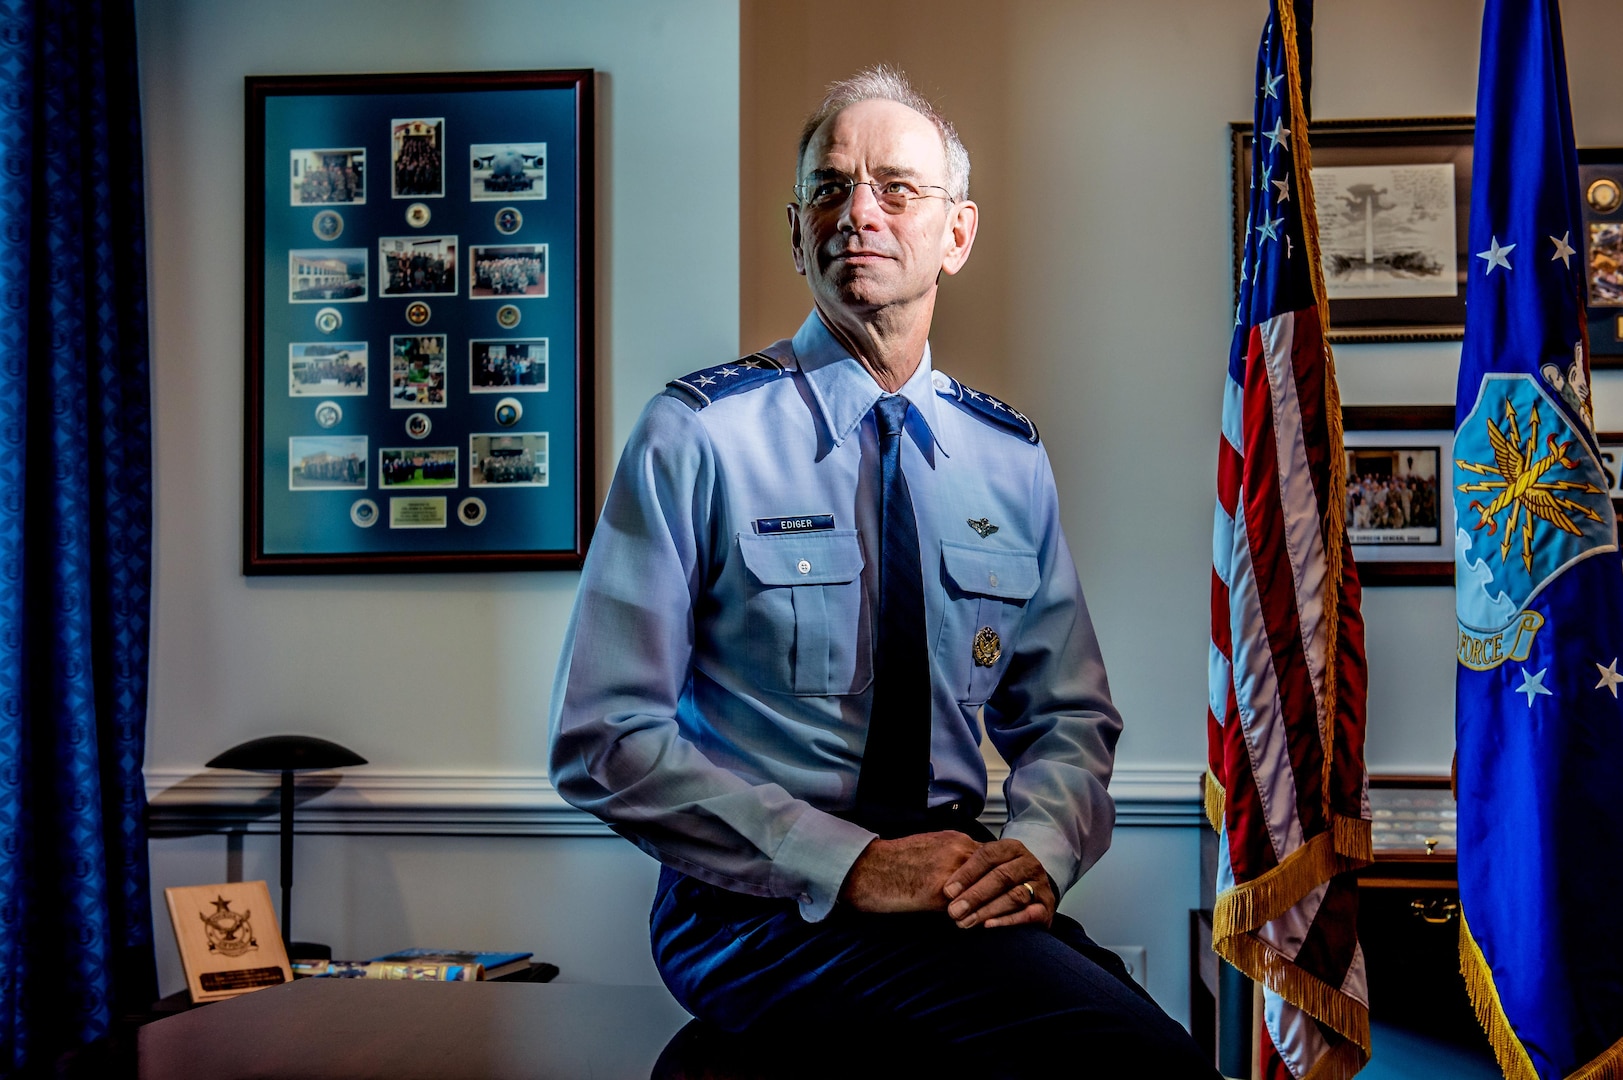 Lt. Gen. Mark Ediger, U.S. Air Force Surgeon General, photographed in his office at the Pentagon, July 8, 2016. Ediger retires from the Air Force, June 1.